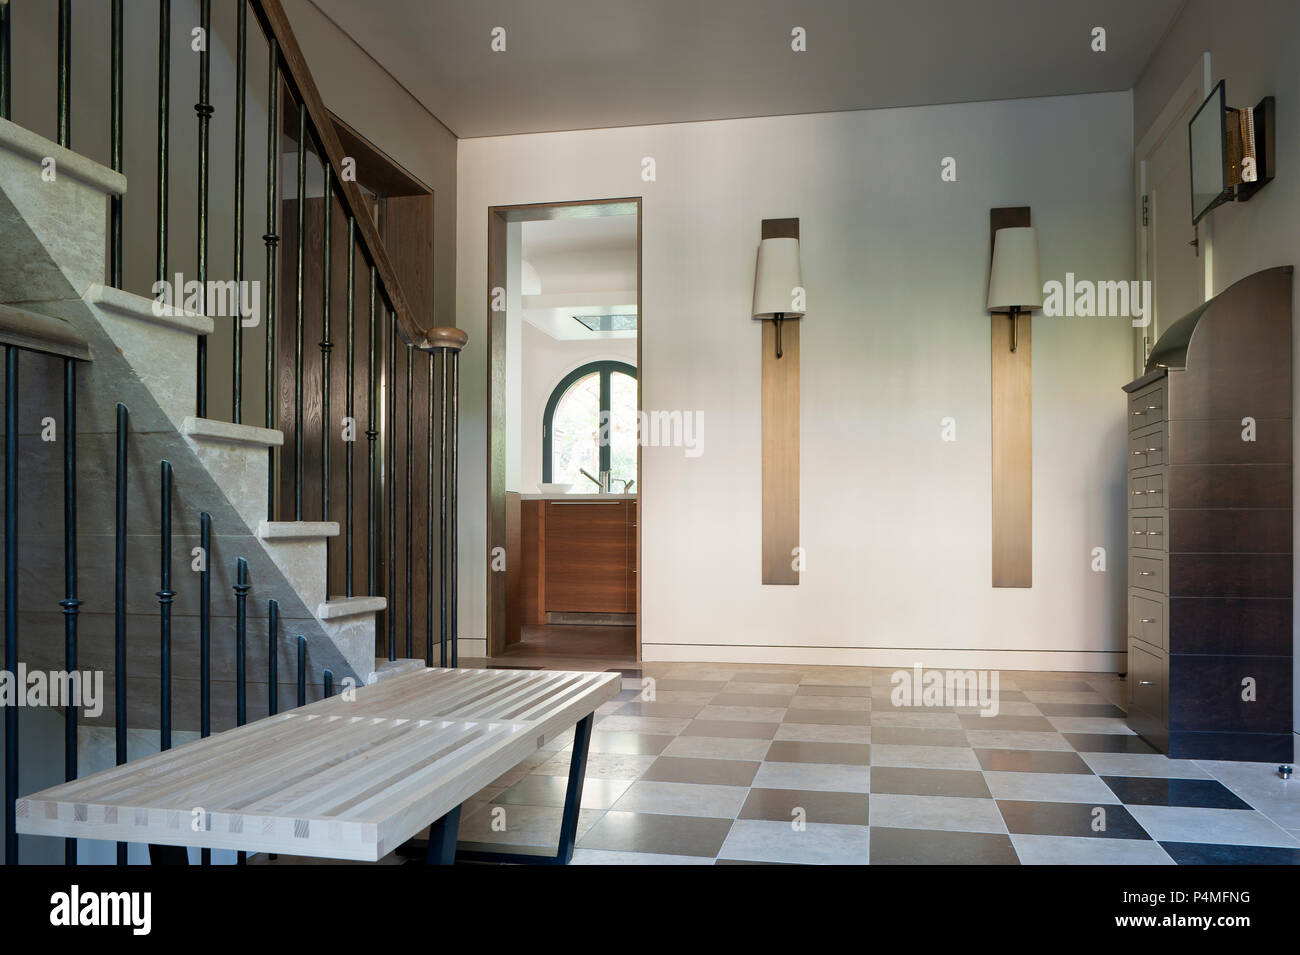 Entrance hall with tiled floor Stock Photo